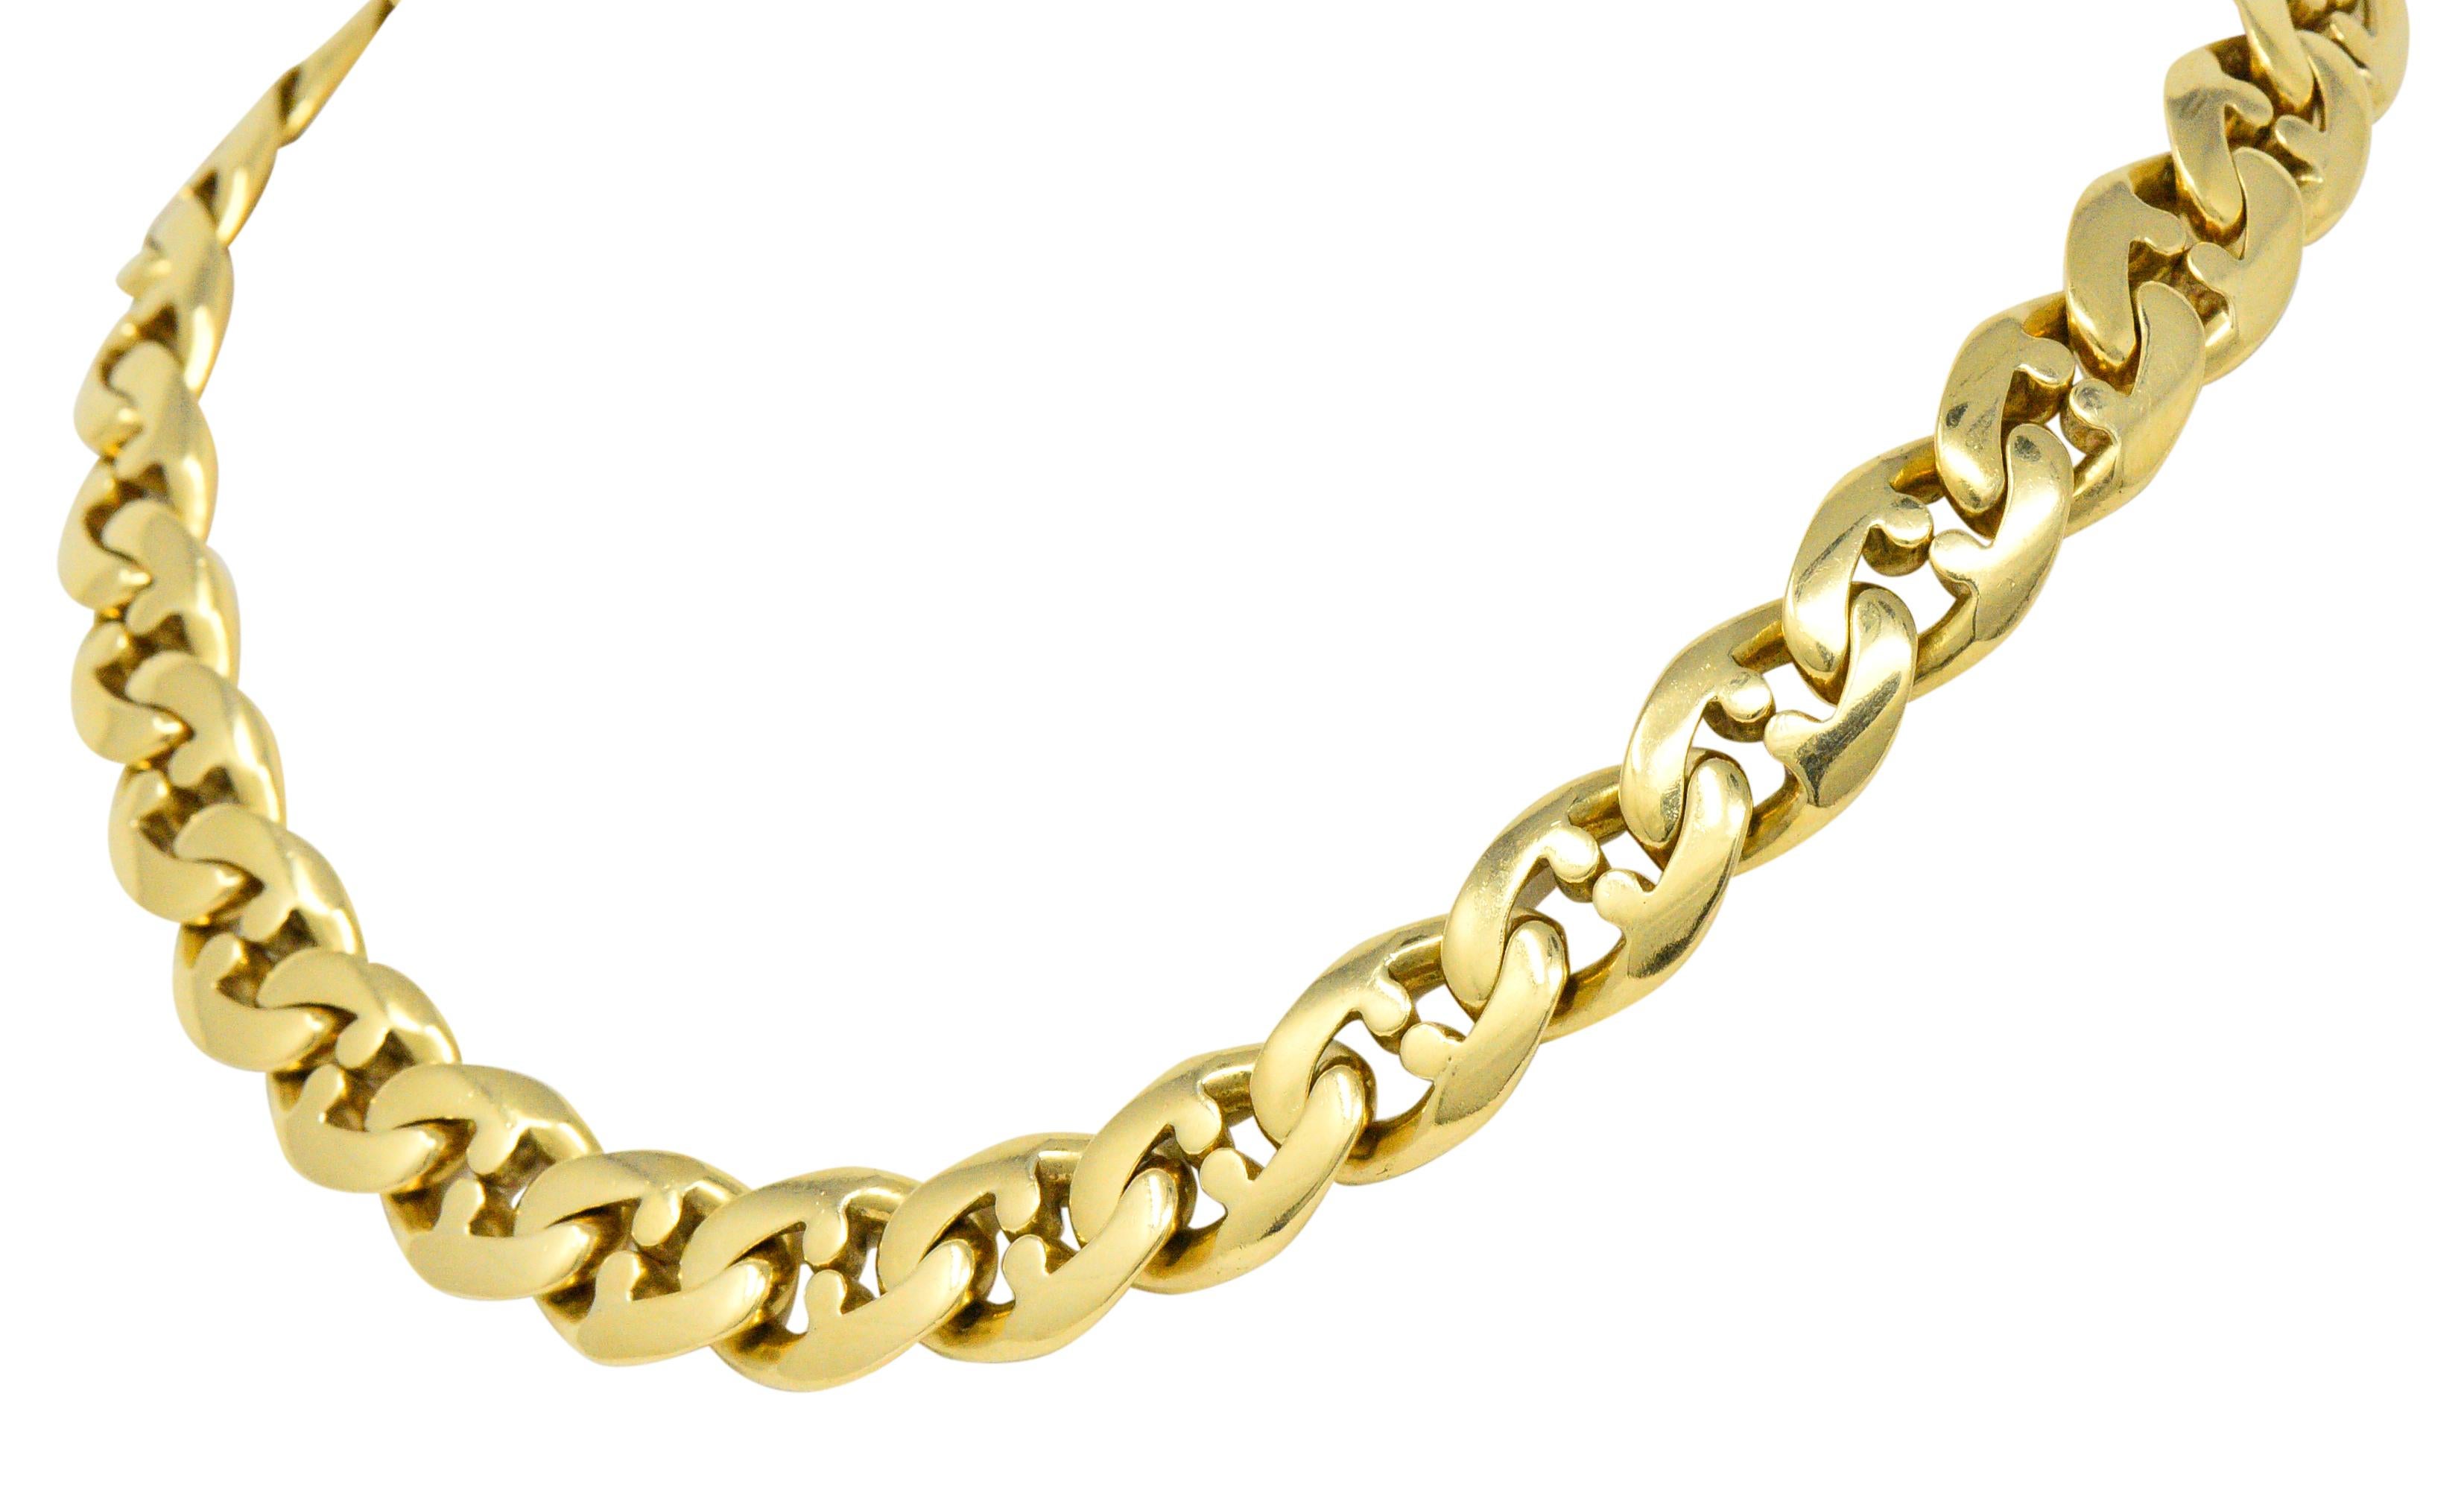 Chain style necklace comprised of stylized anchor links

With a high polished finish

Completed by a concealed clasp with figure-eight safety

Fully signed Bulgari Italy

Italian assay marks for 18 karat gold

Length: 15 inches

Width: 1/2